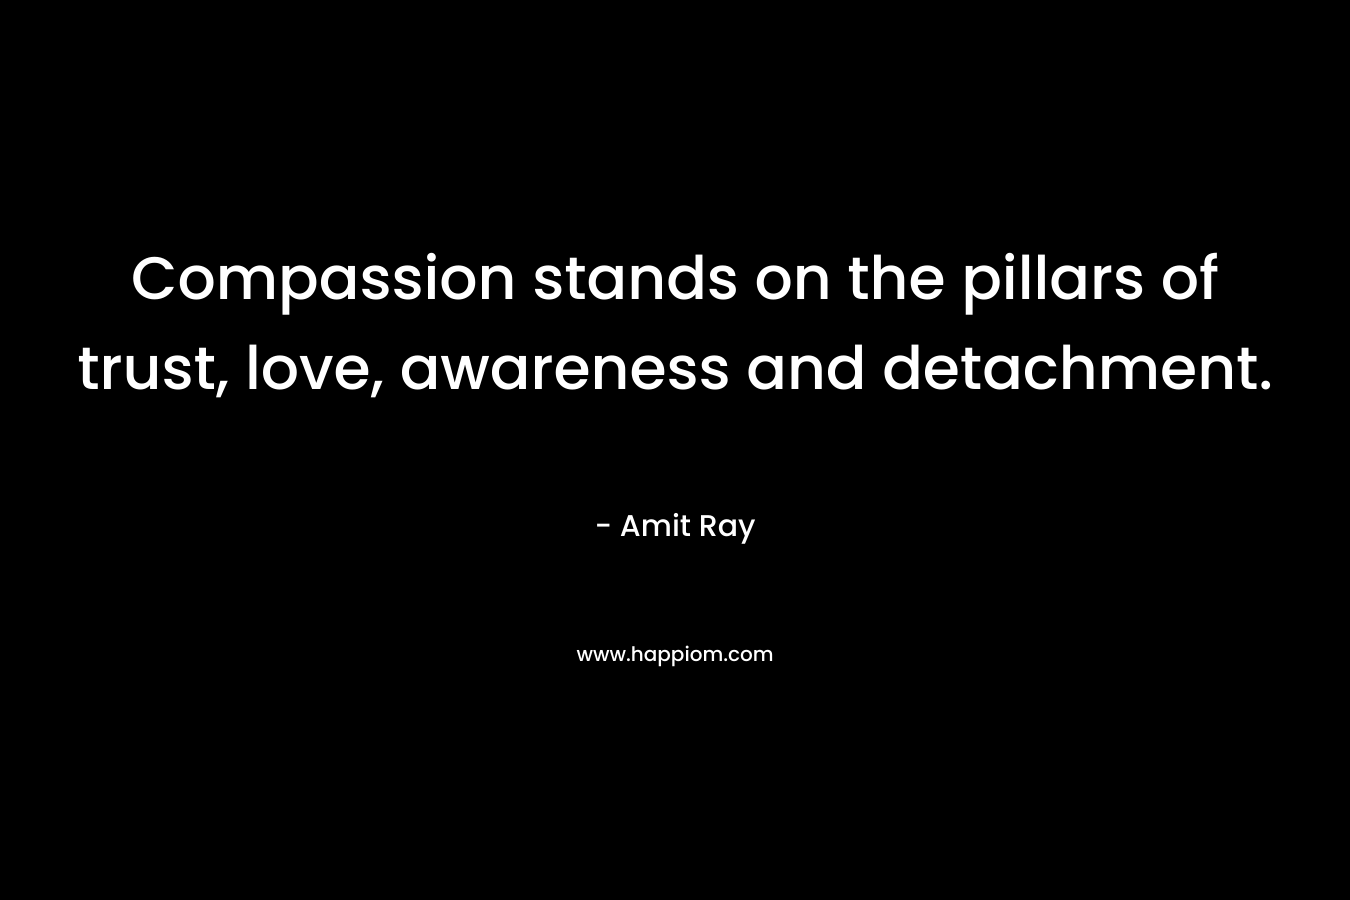 Compassion stands on the pillars of trust, love, awareness and detachment. – Amit Ray